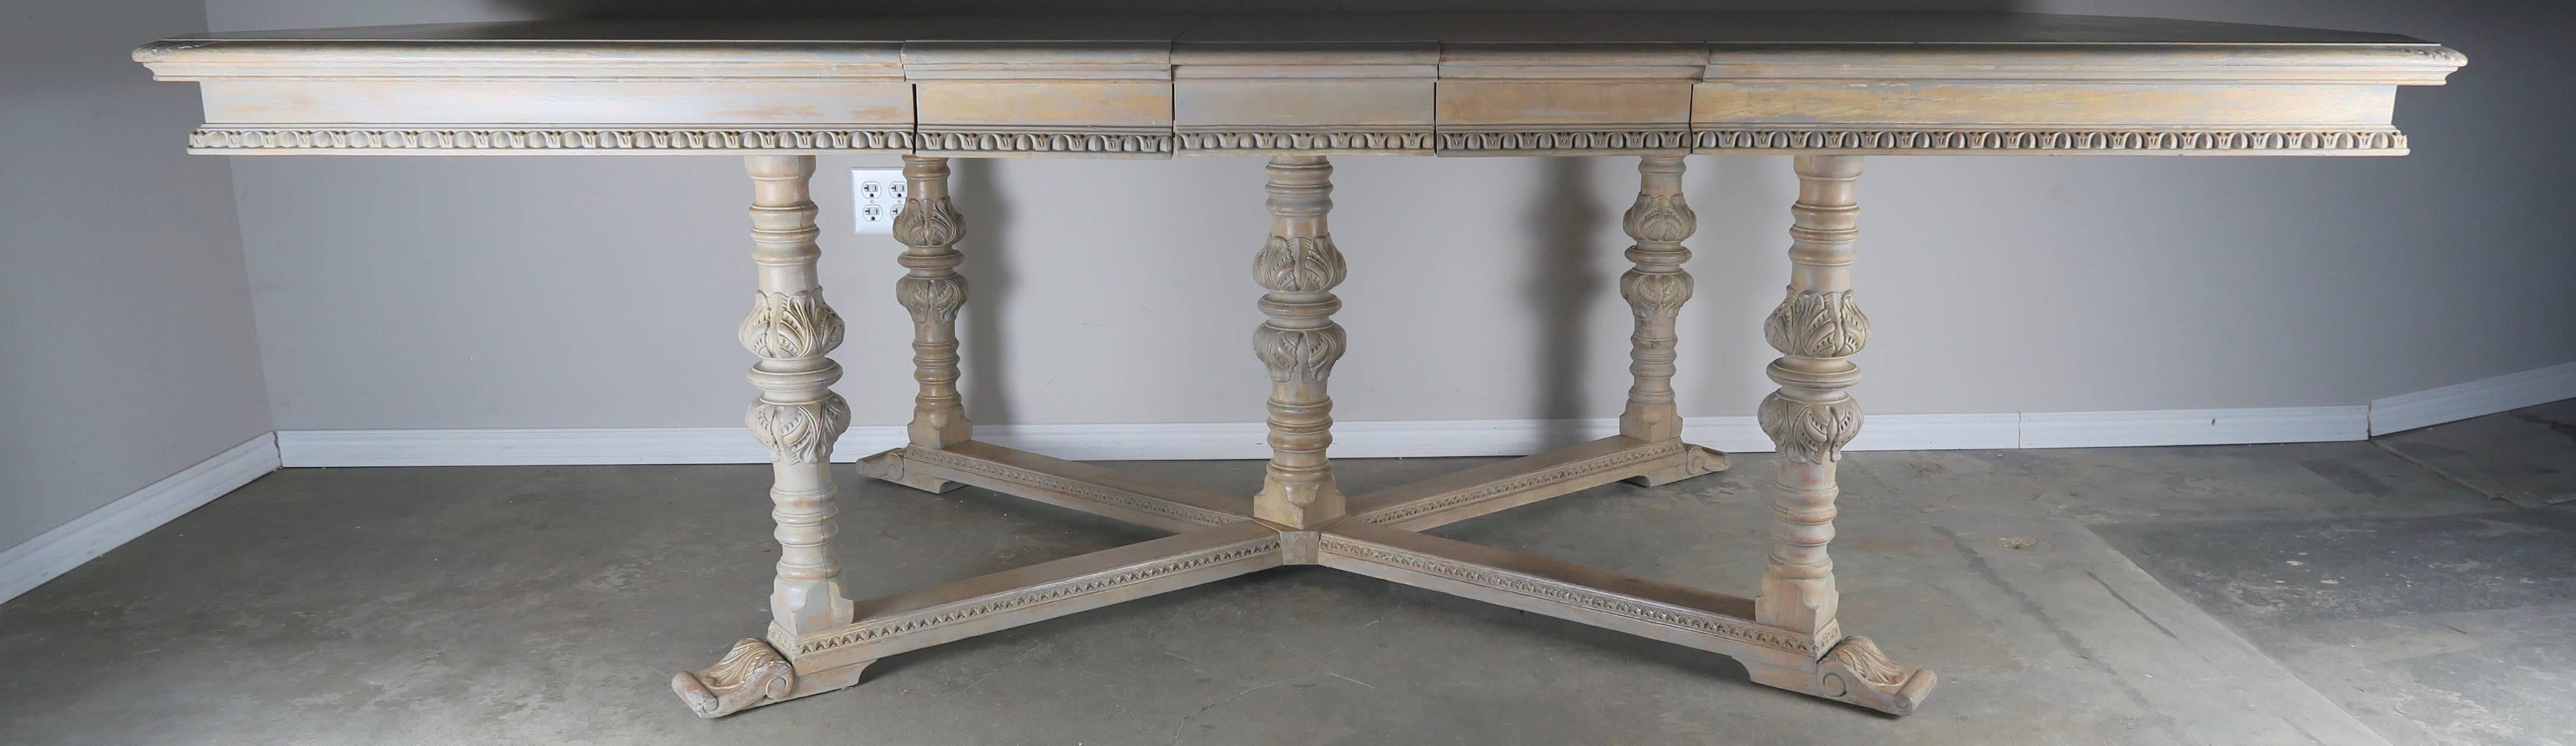 Painted Italian Neoclassical Style Dining Room Table with Leaves